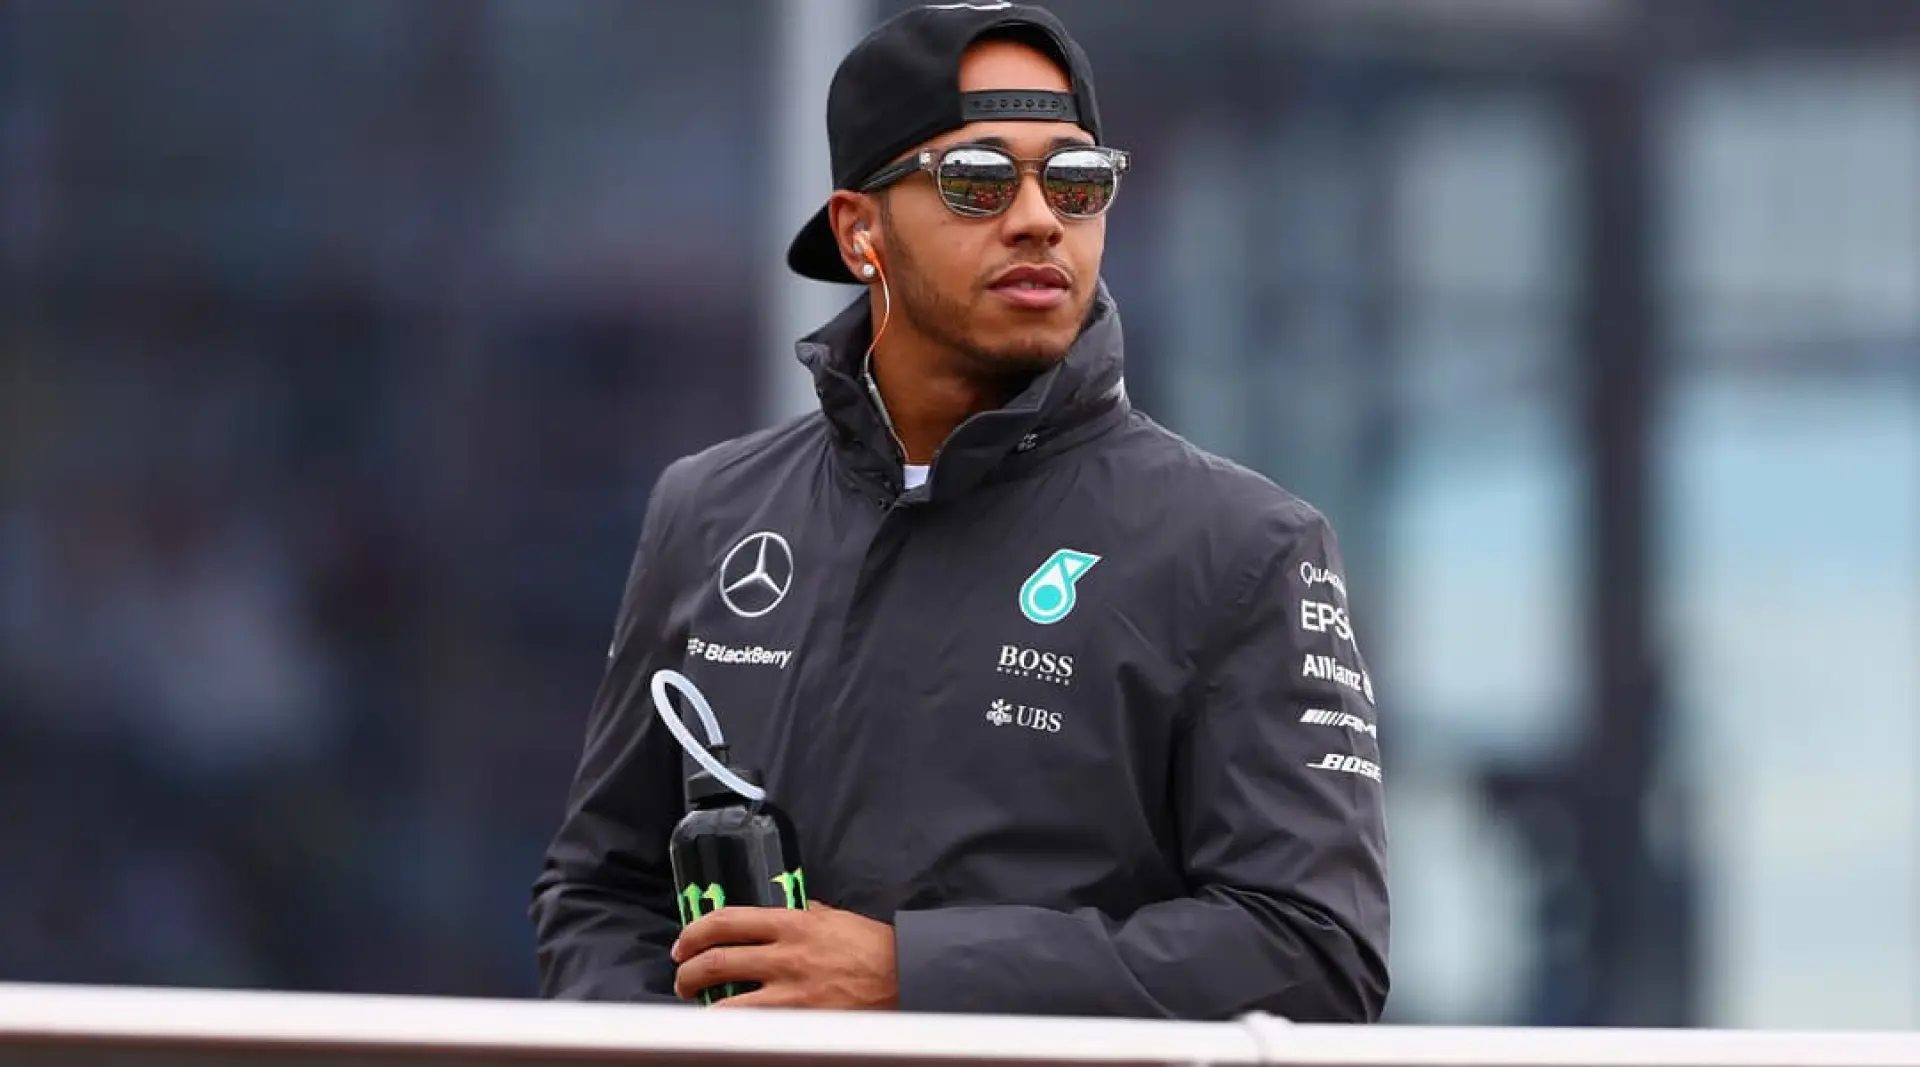 Lewis Hamilton looks on during Hungarian Grand Prix 2015 weekend